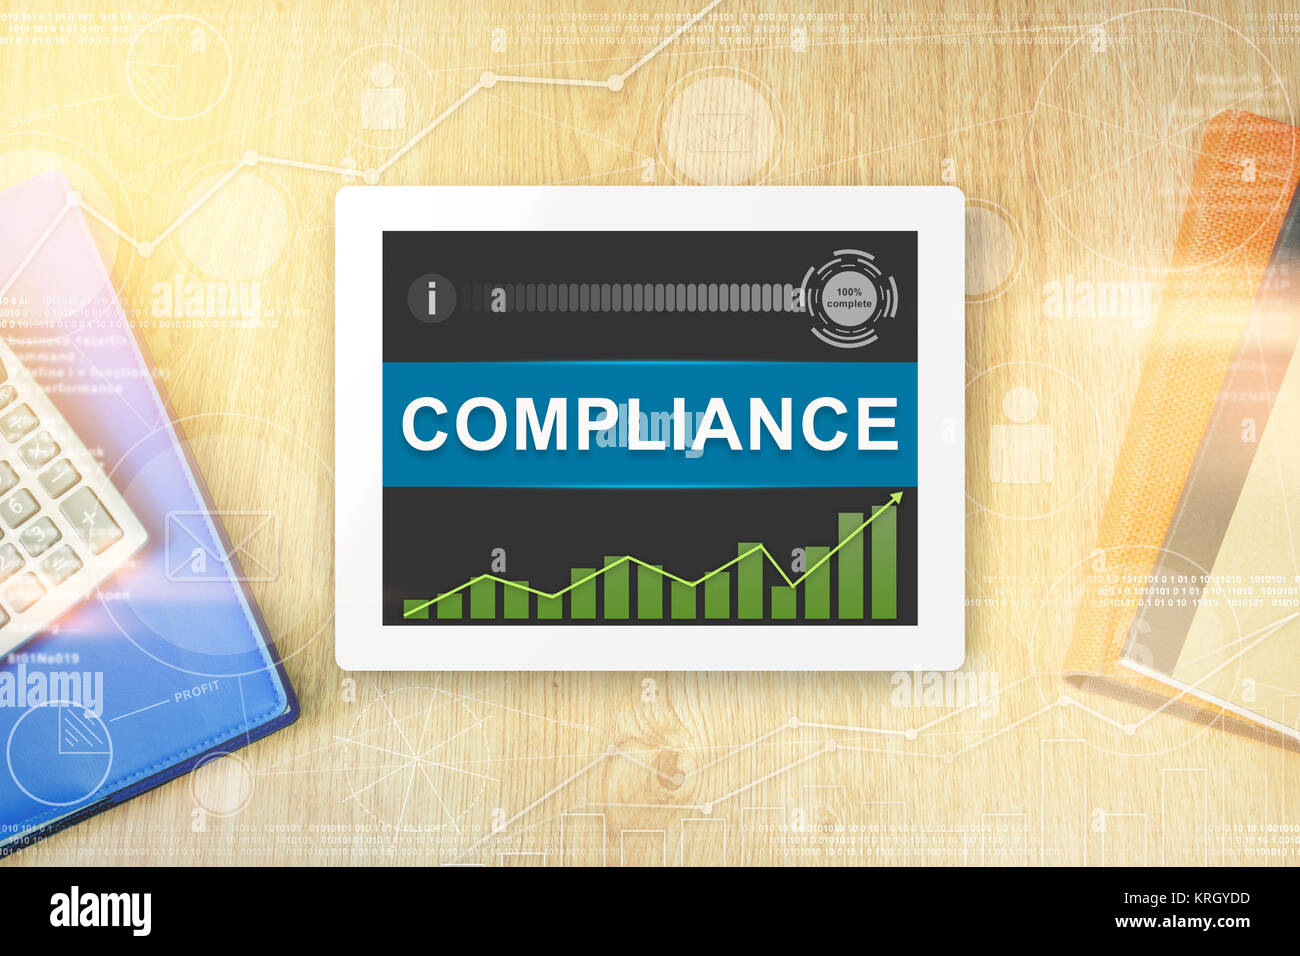 compliance word on tablet Stock Photo